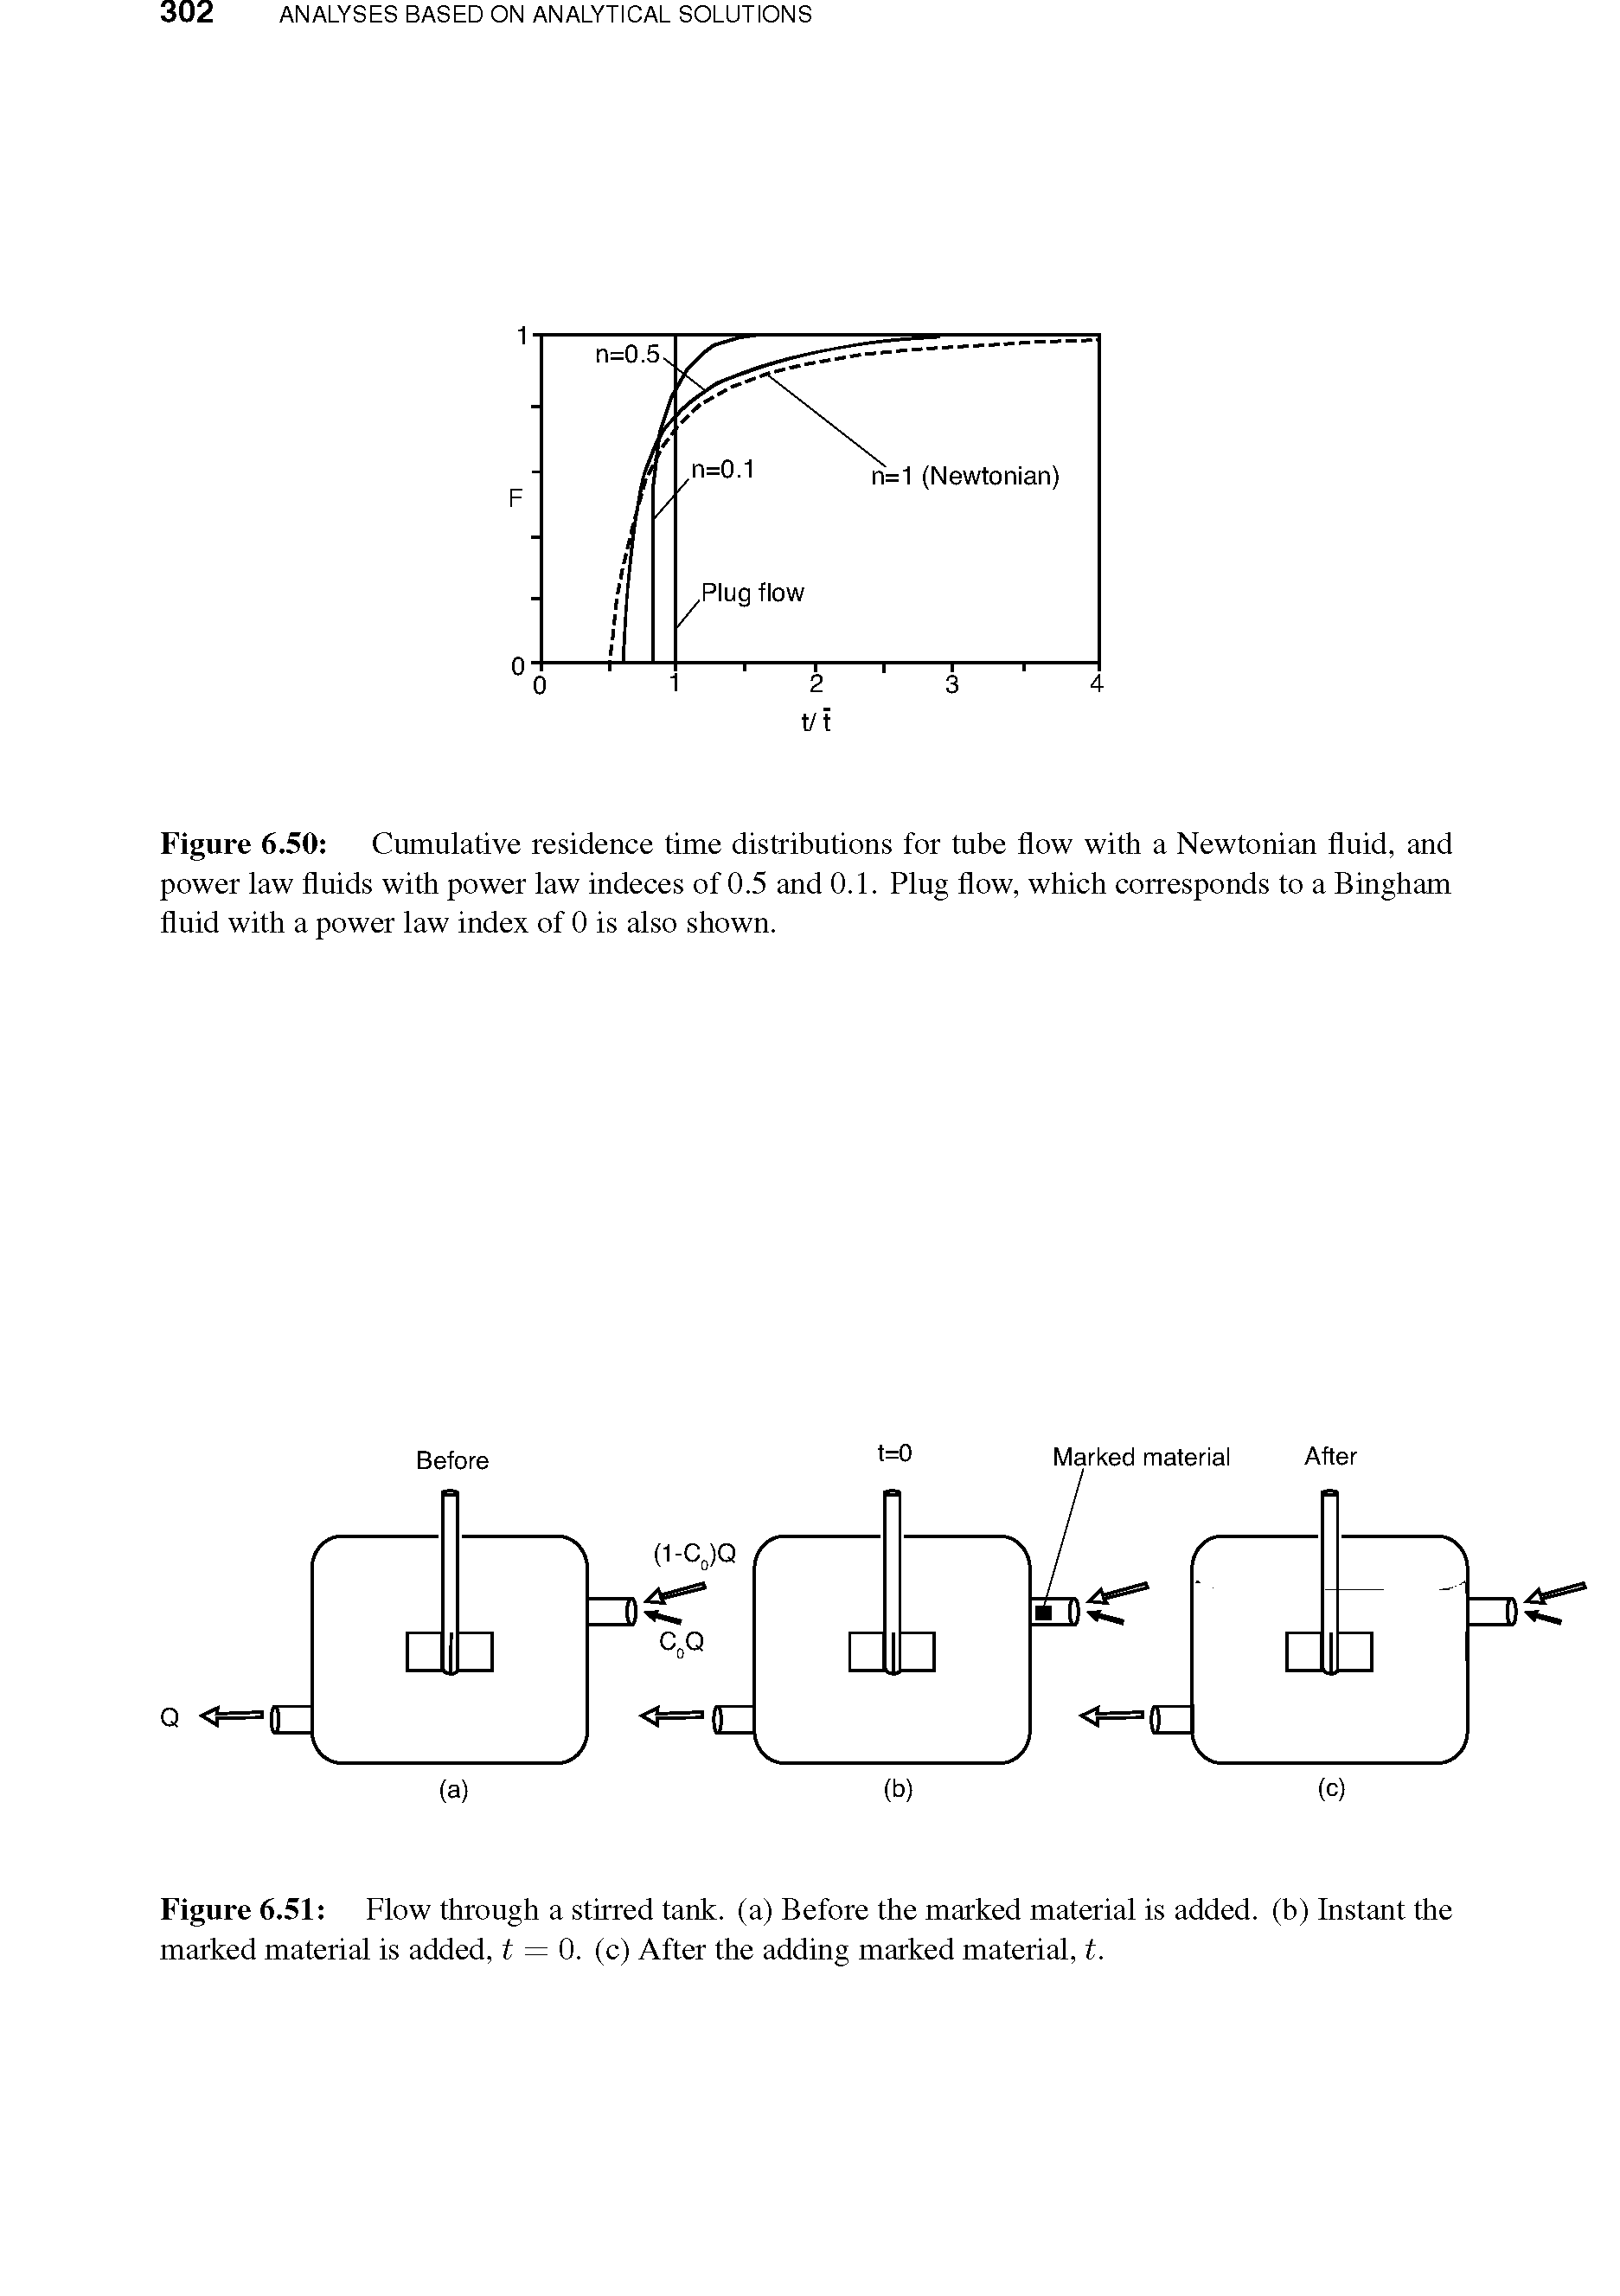 Figure 6.50 Cumulative residence time distributions for tube flow with a Newtonian fluid, and power law fluids with power law indeces of 0.5 and 0.1. Plug flow, which corresponds to a Bingham fluid with a power law index of 0 is also shown.